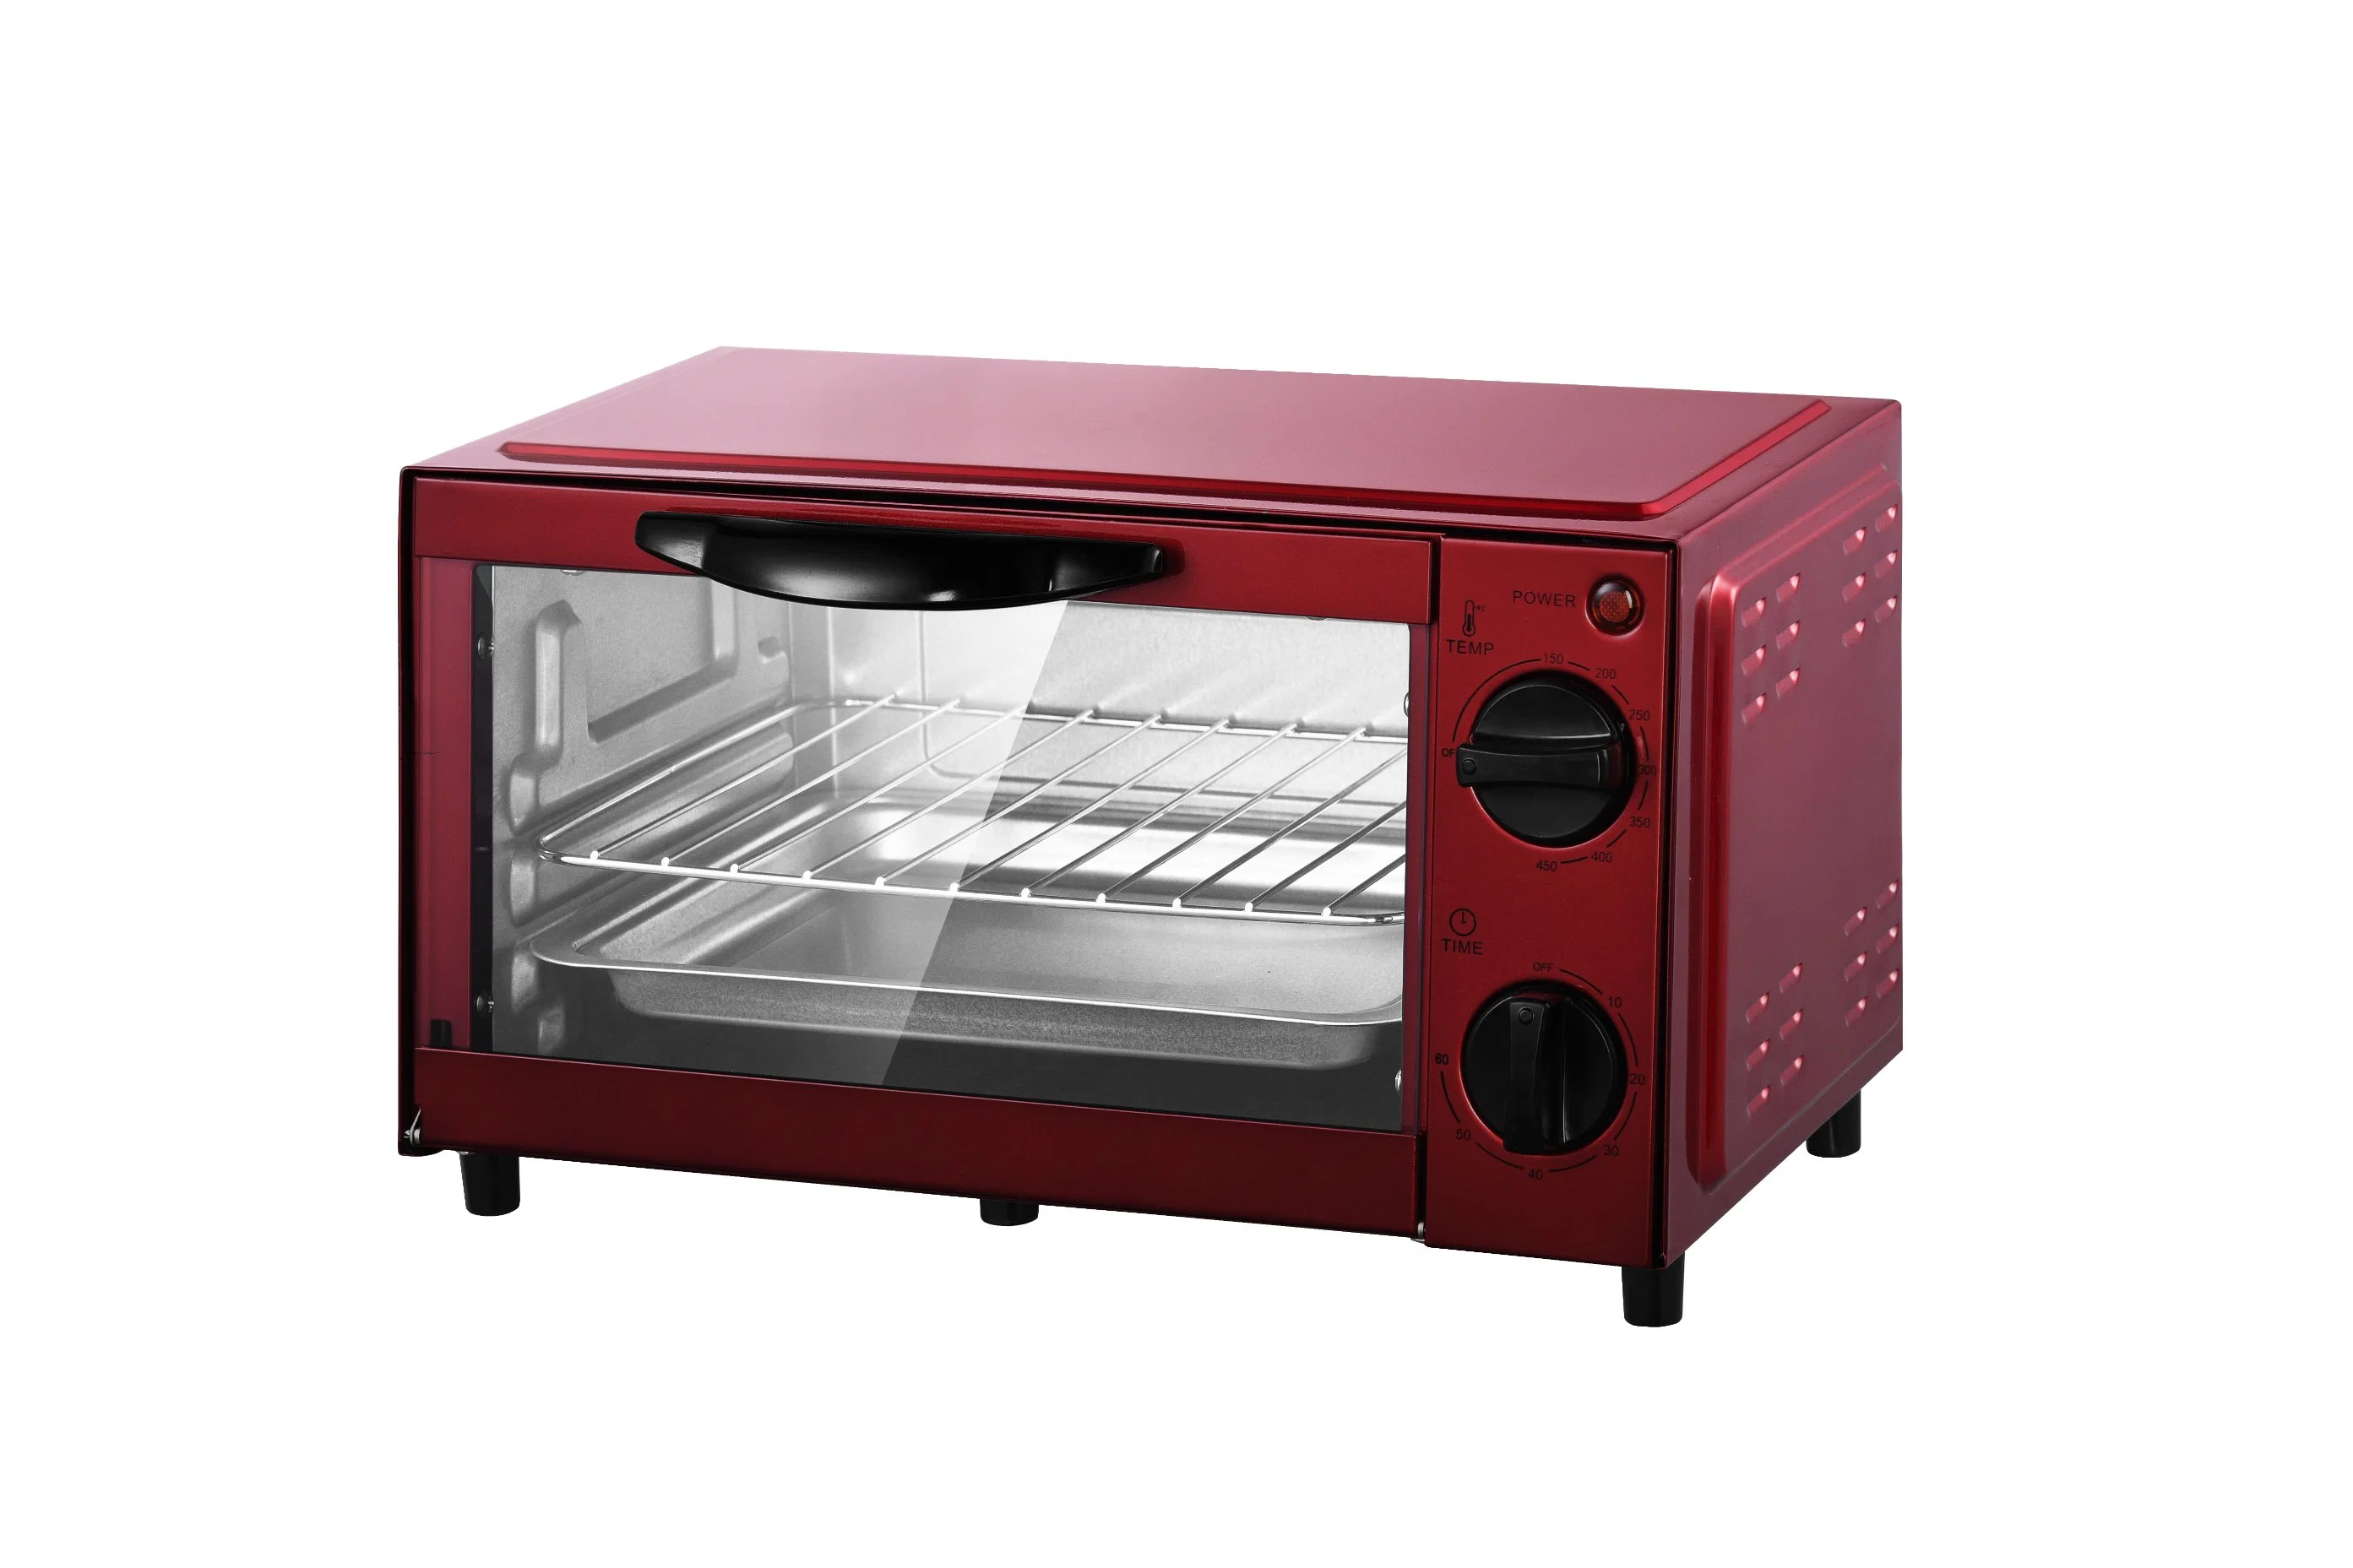 Household Appliances Bakery Pizza Electric Toaster Small Roasted Oven 11L